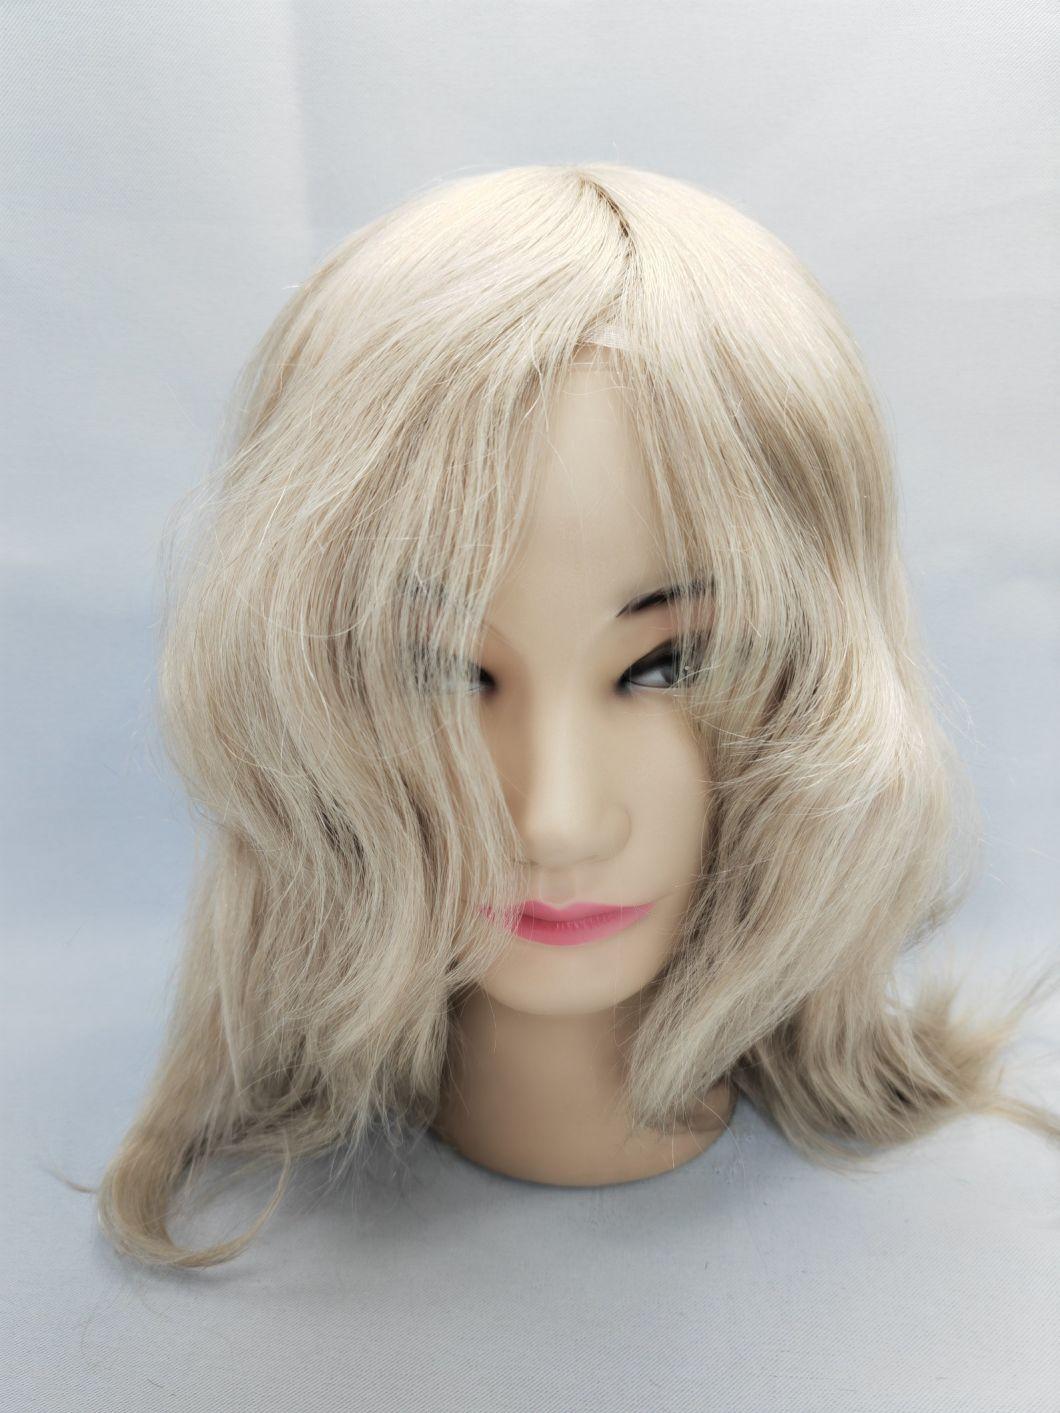 2022 Most Popular Fine Welded Mono Human Hair System Made of Human Remy Hair